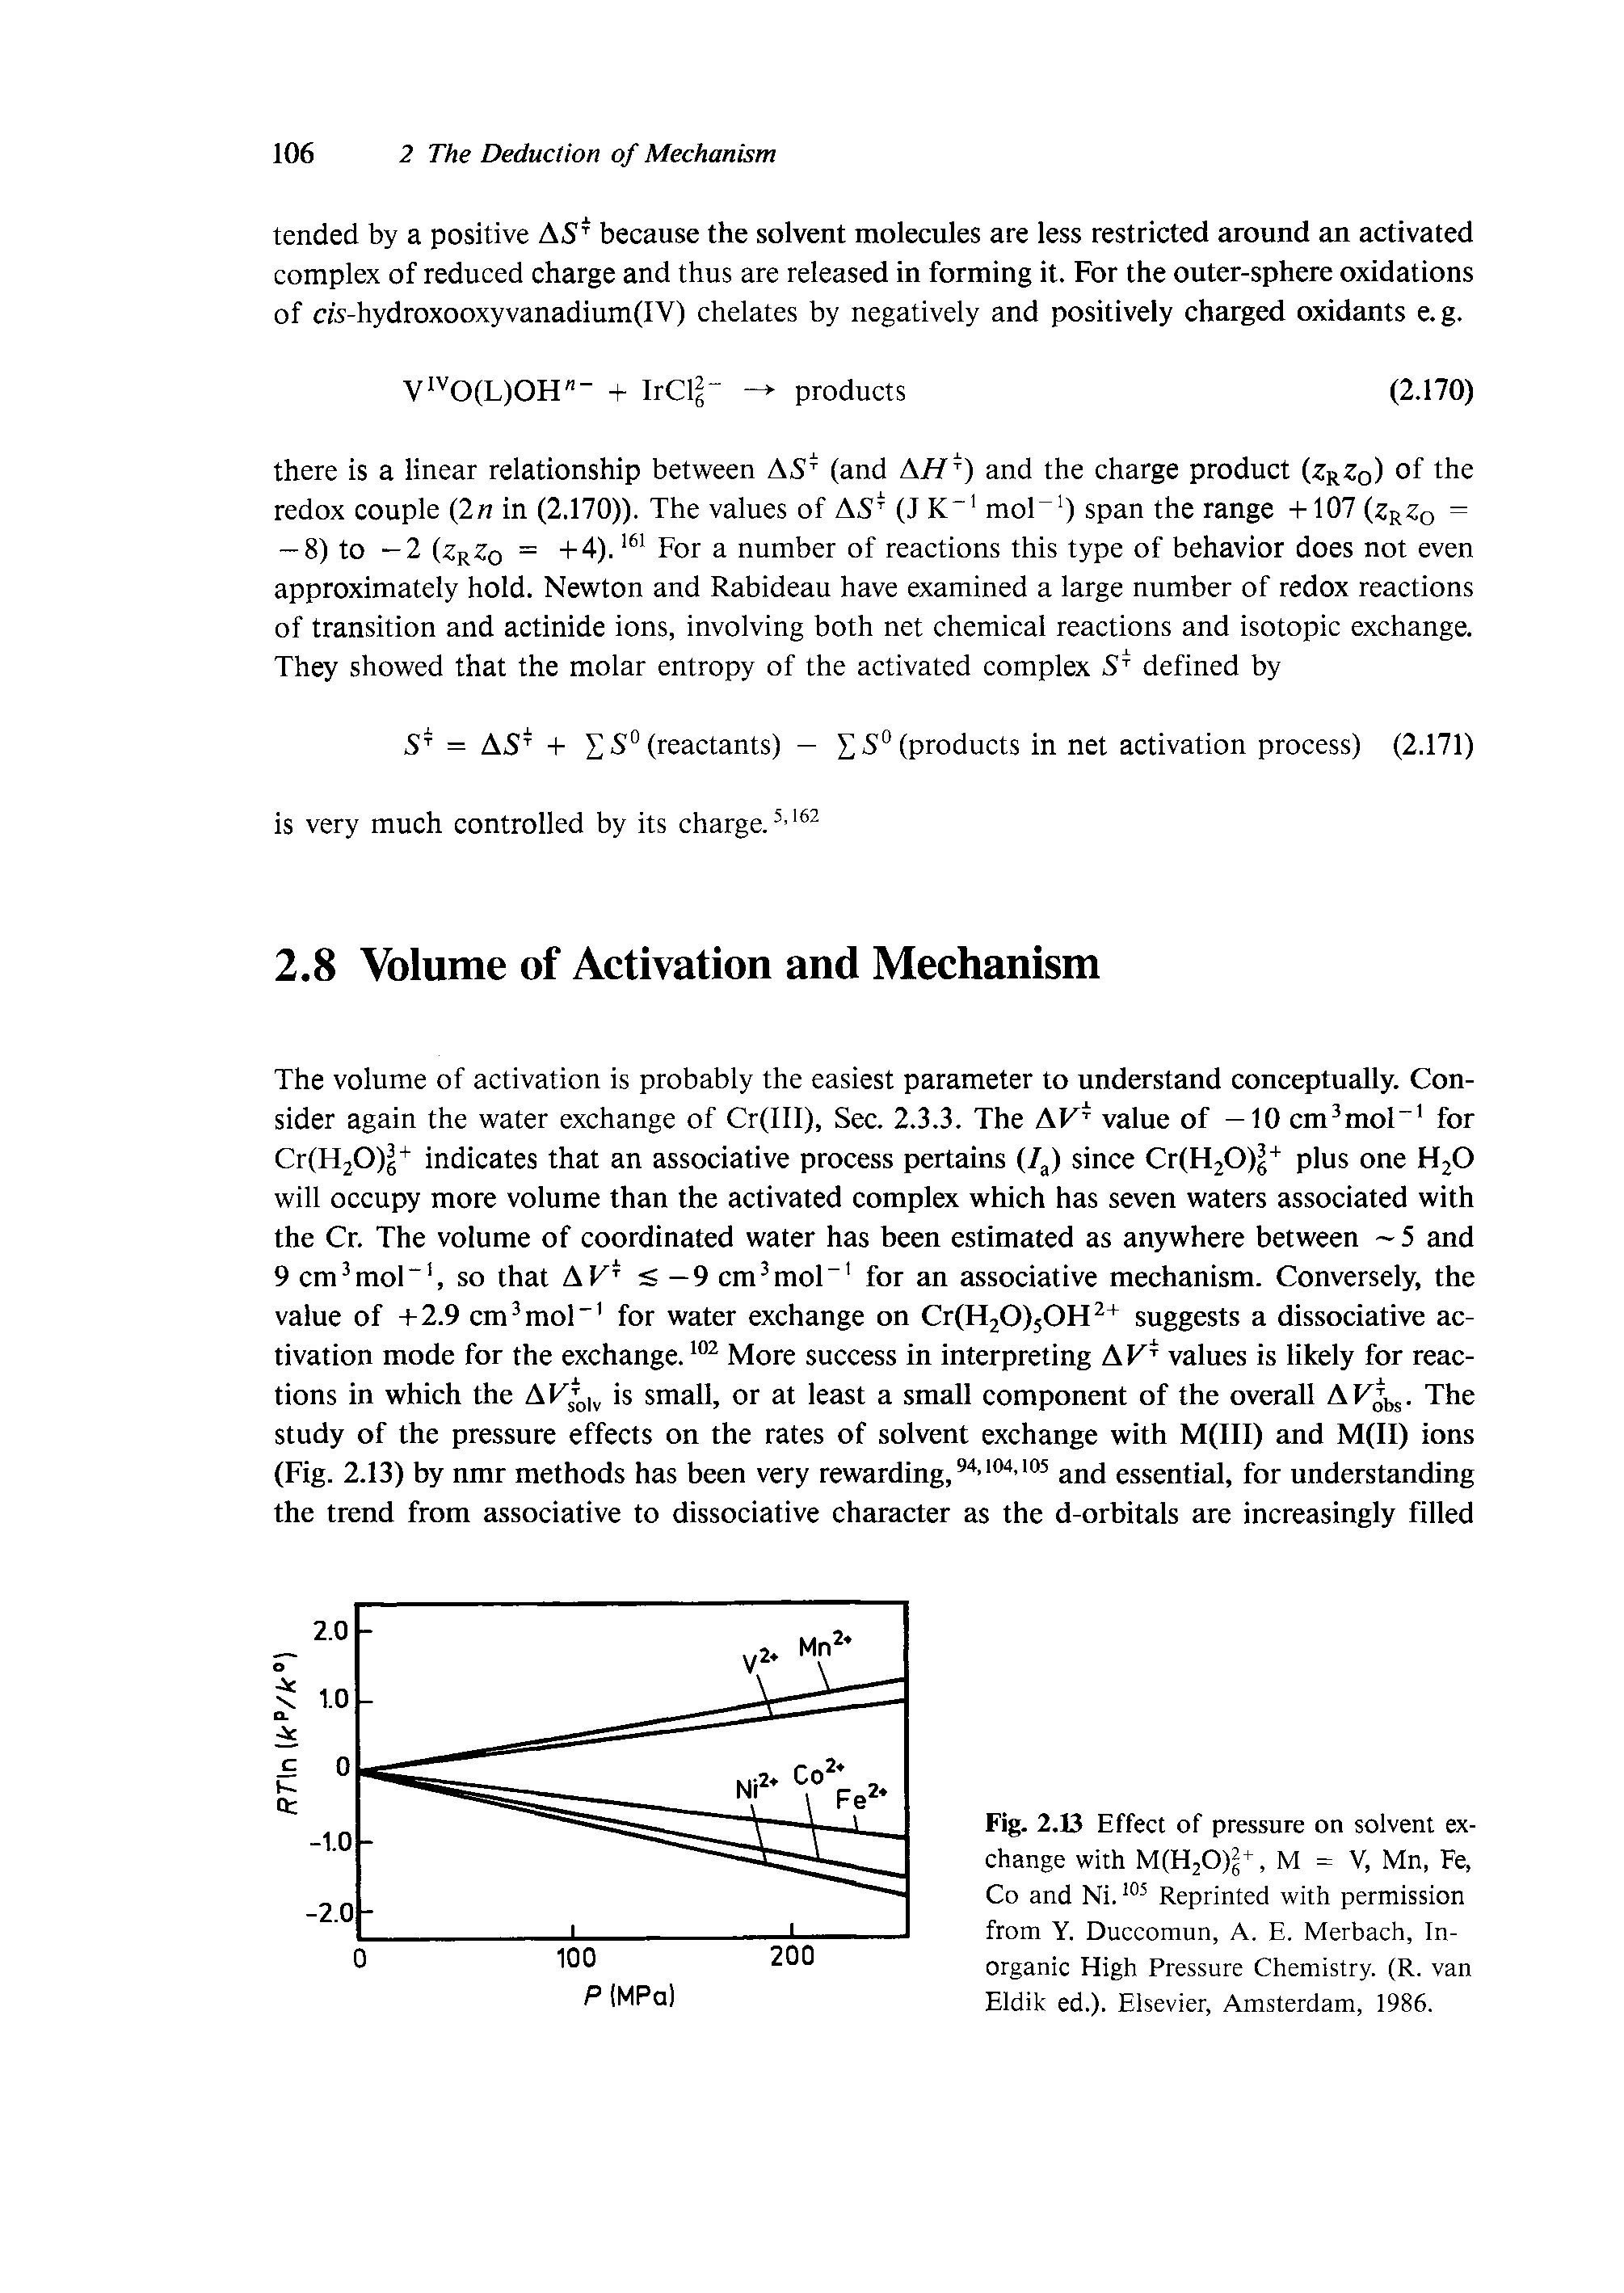 Fig. 2.13 Effect of pressure on solvent exchange with M(H20) +, M = V, Mn, Fe, Co and Ni. Reprinted with permission from Y. Duccomun, A. E. Merbach, Inorganic High Pressure Chemistry. (R. van Eldik ed.). Elsevier, Amsterdam, 1986.